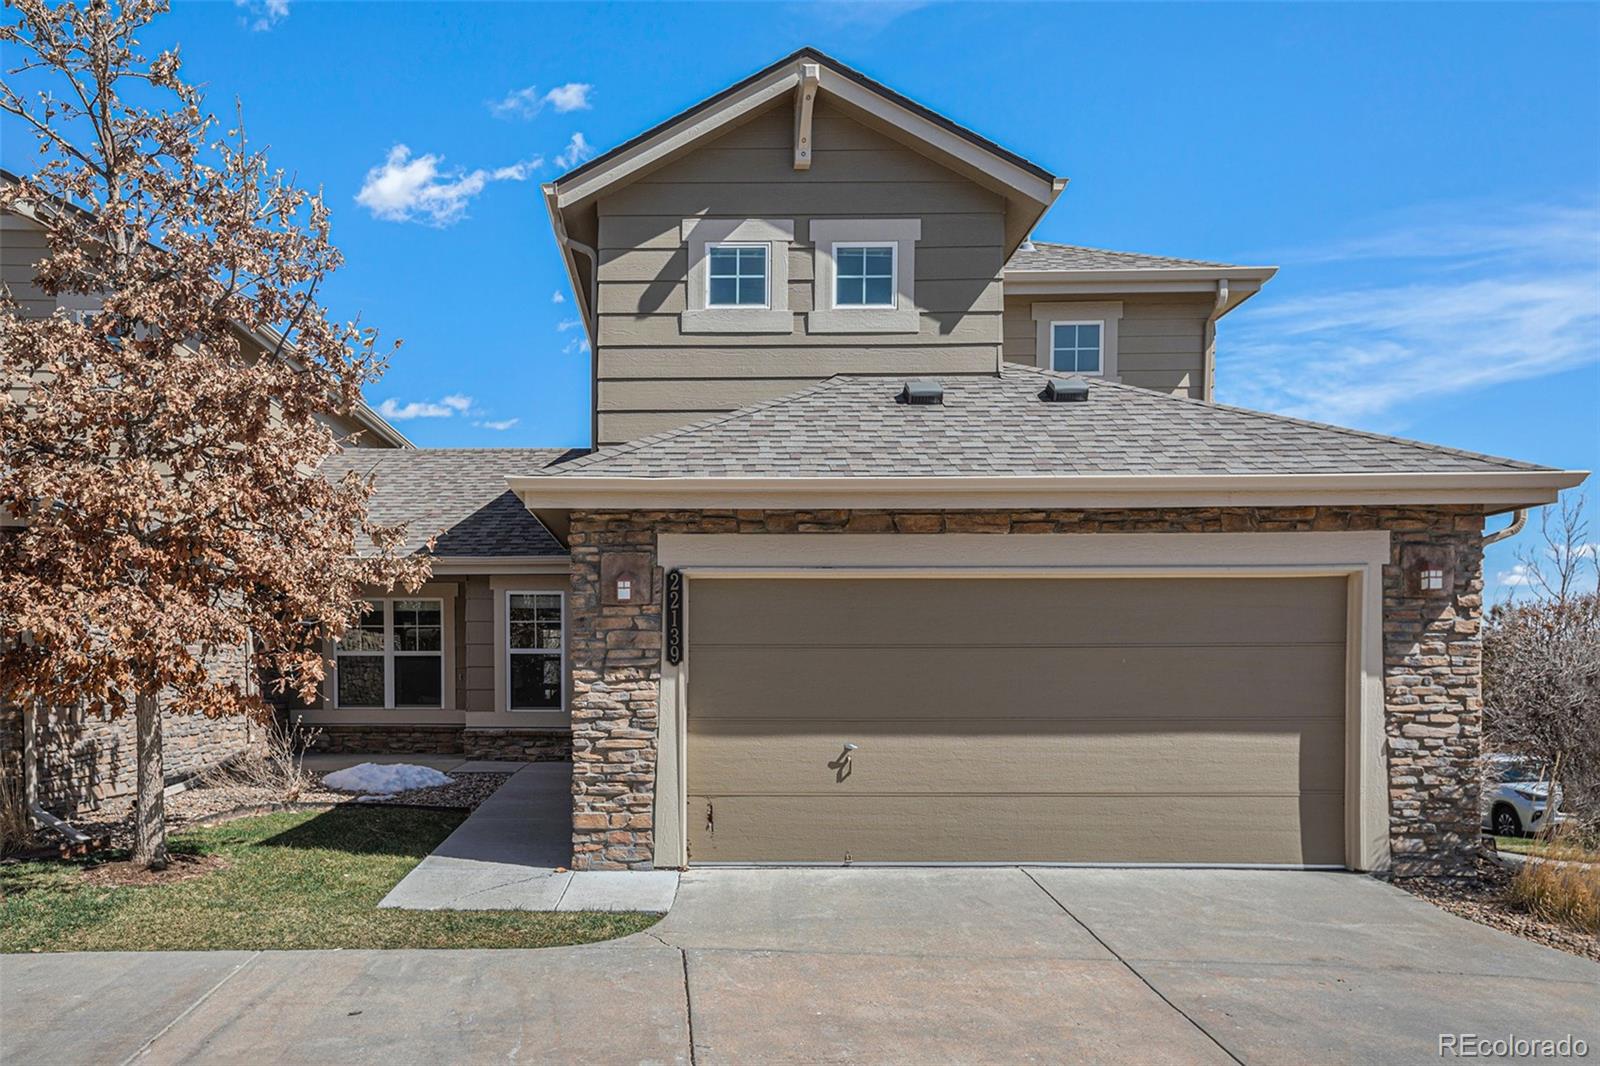 22139 e jamison place, Aurora sold home. Closed on 2024-04-19 for $443,000.